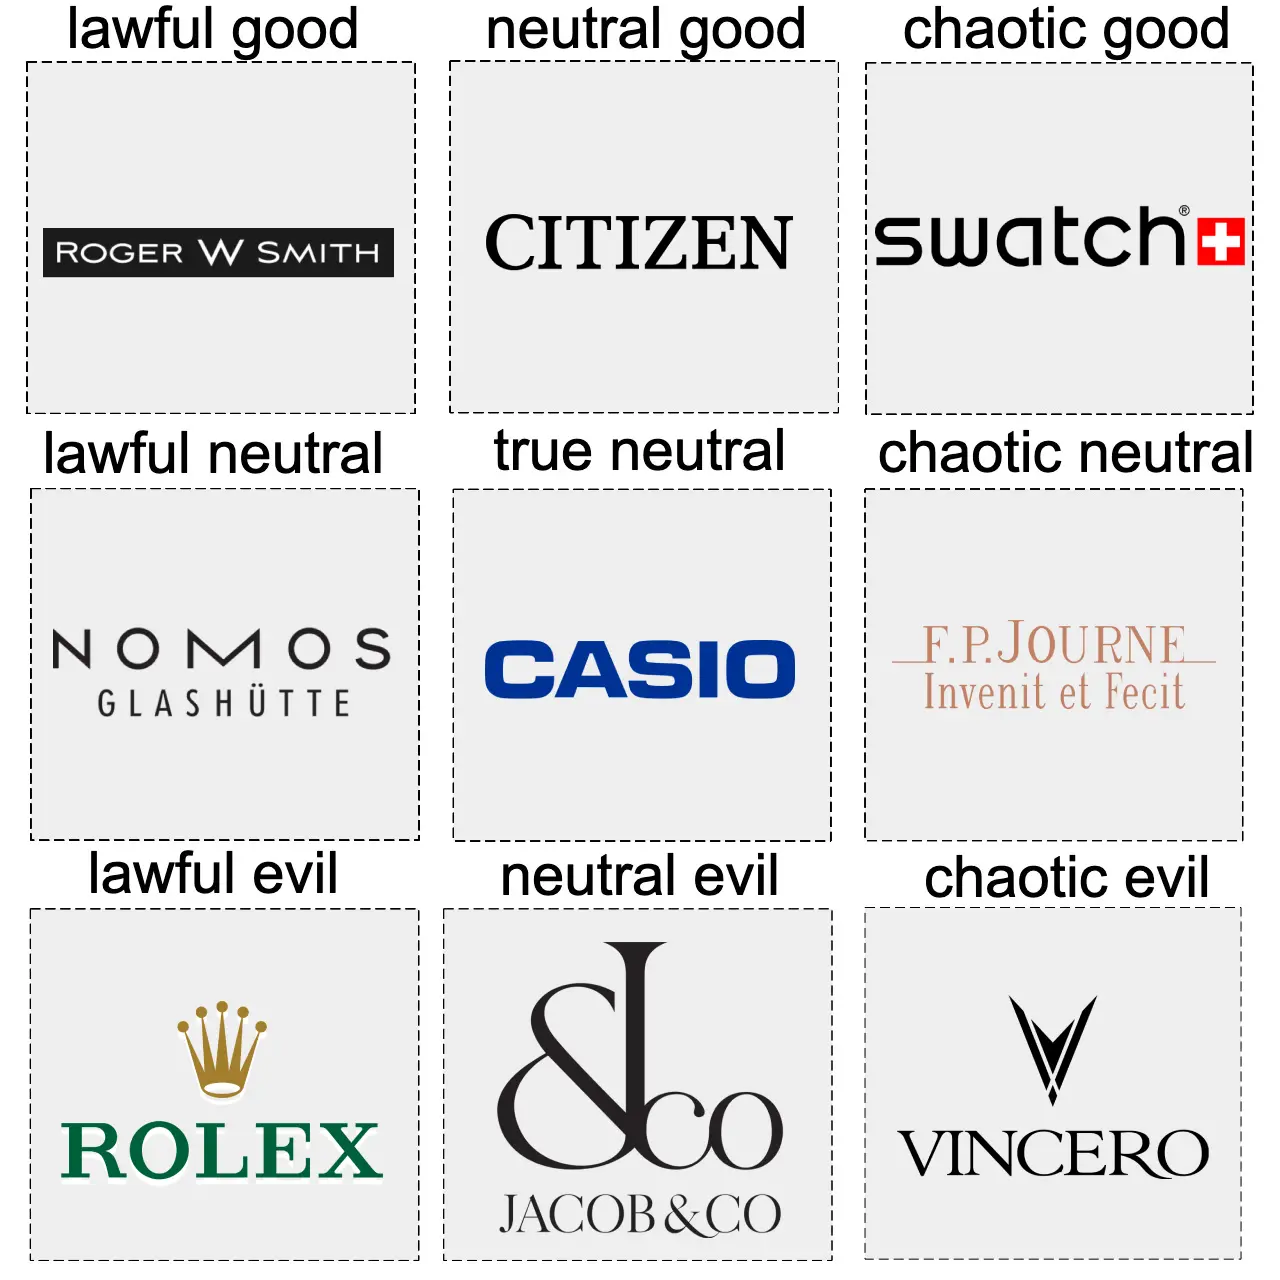 The Time+Tide watch brand alignment chart